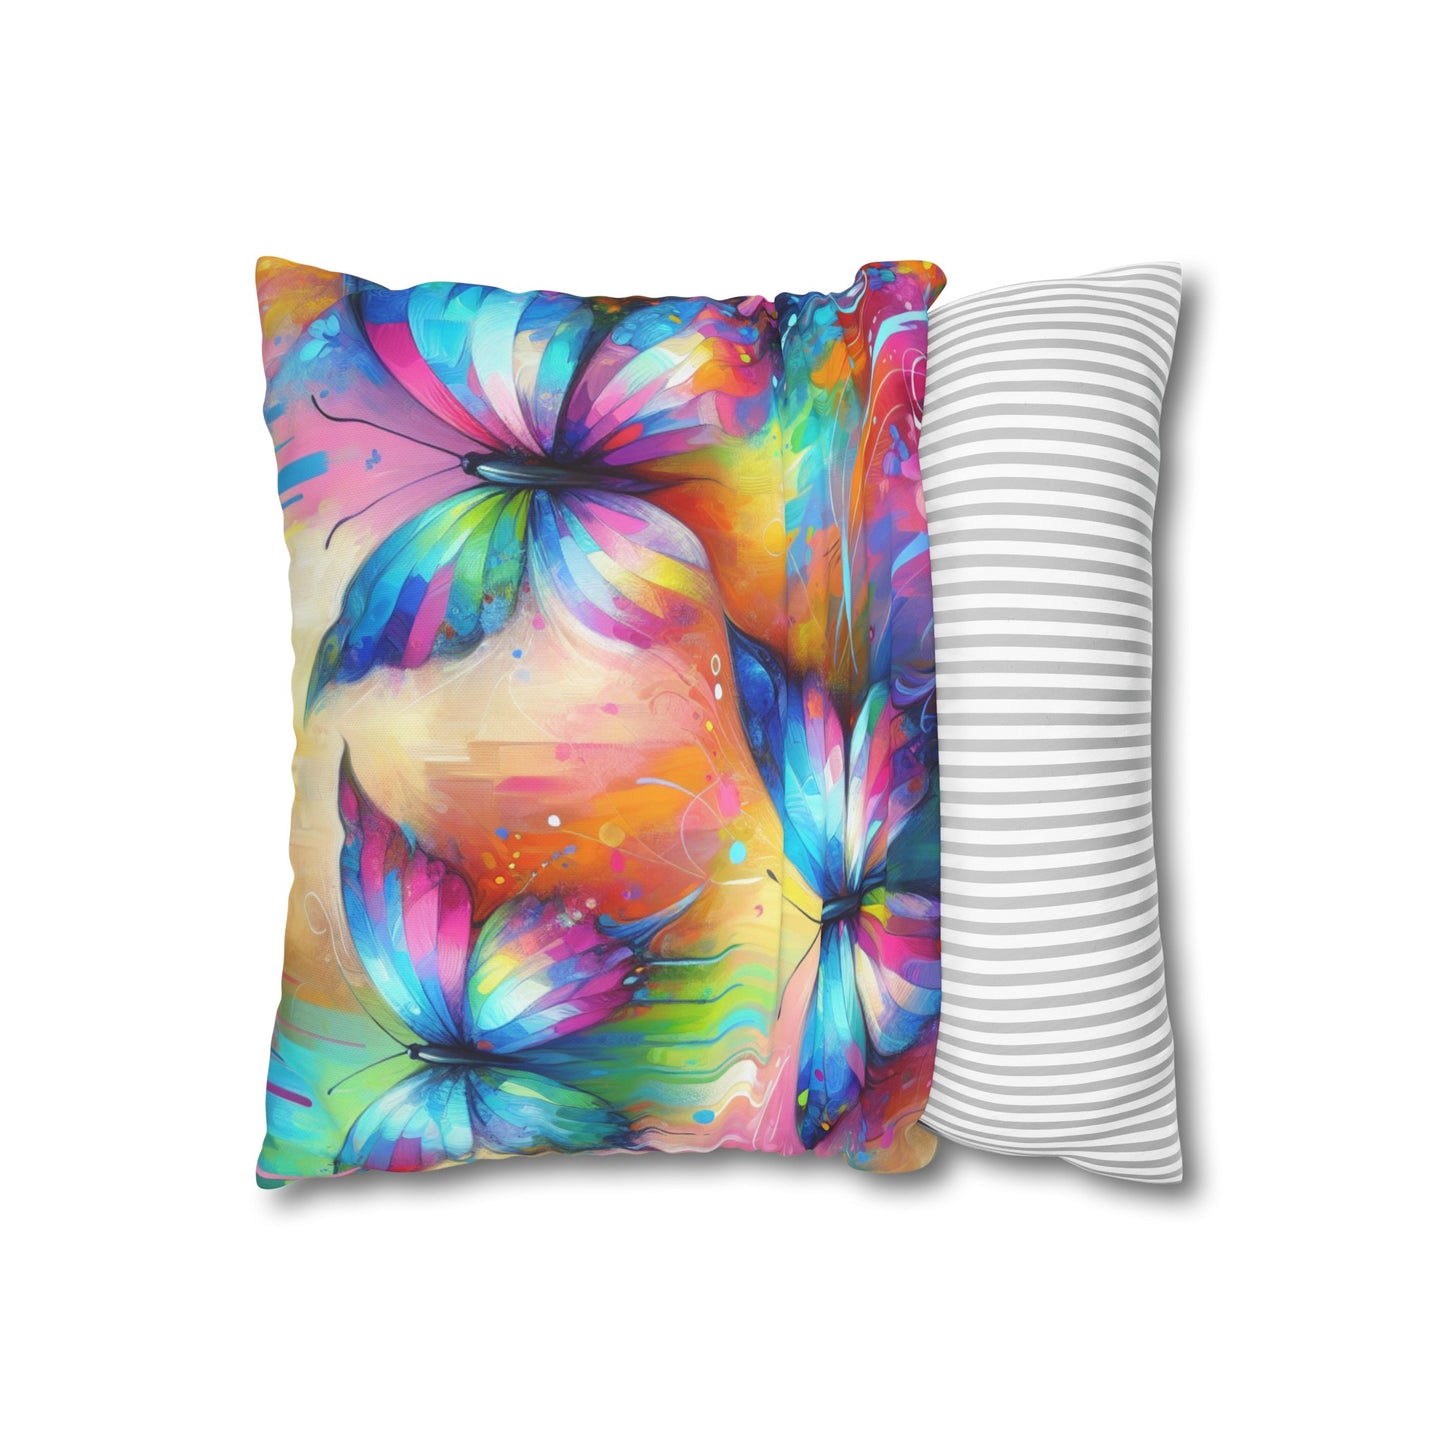 Psychedelic Rainbow Butterflies #2 Cushion Cover